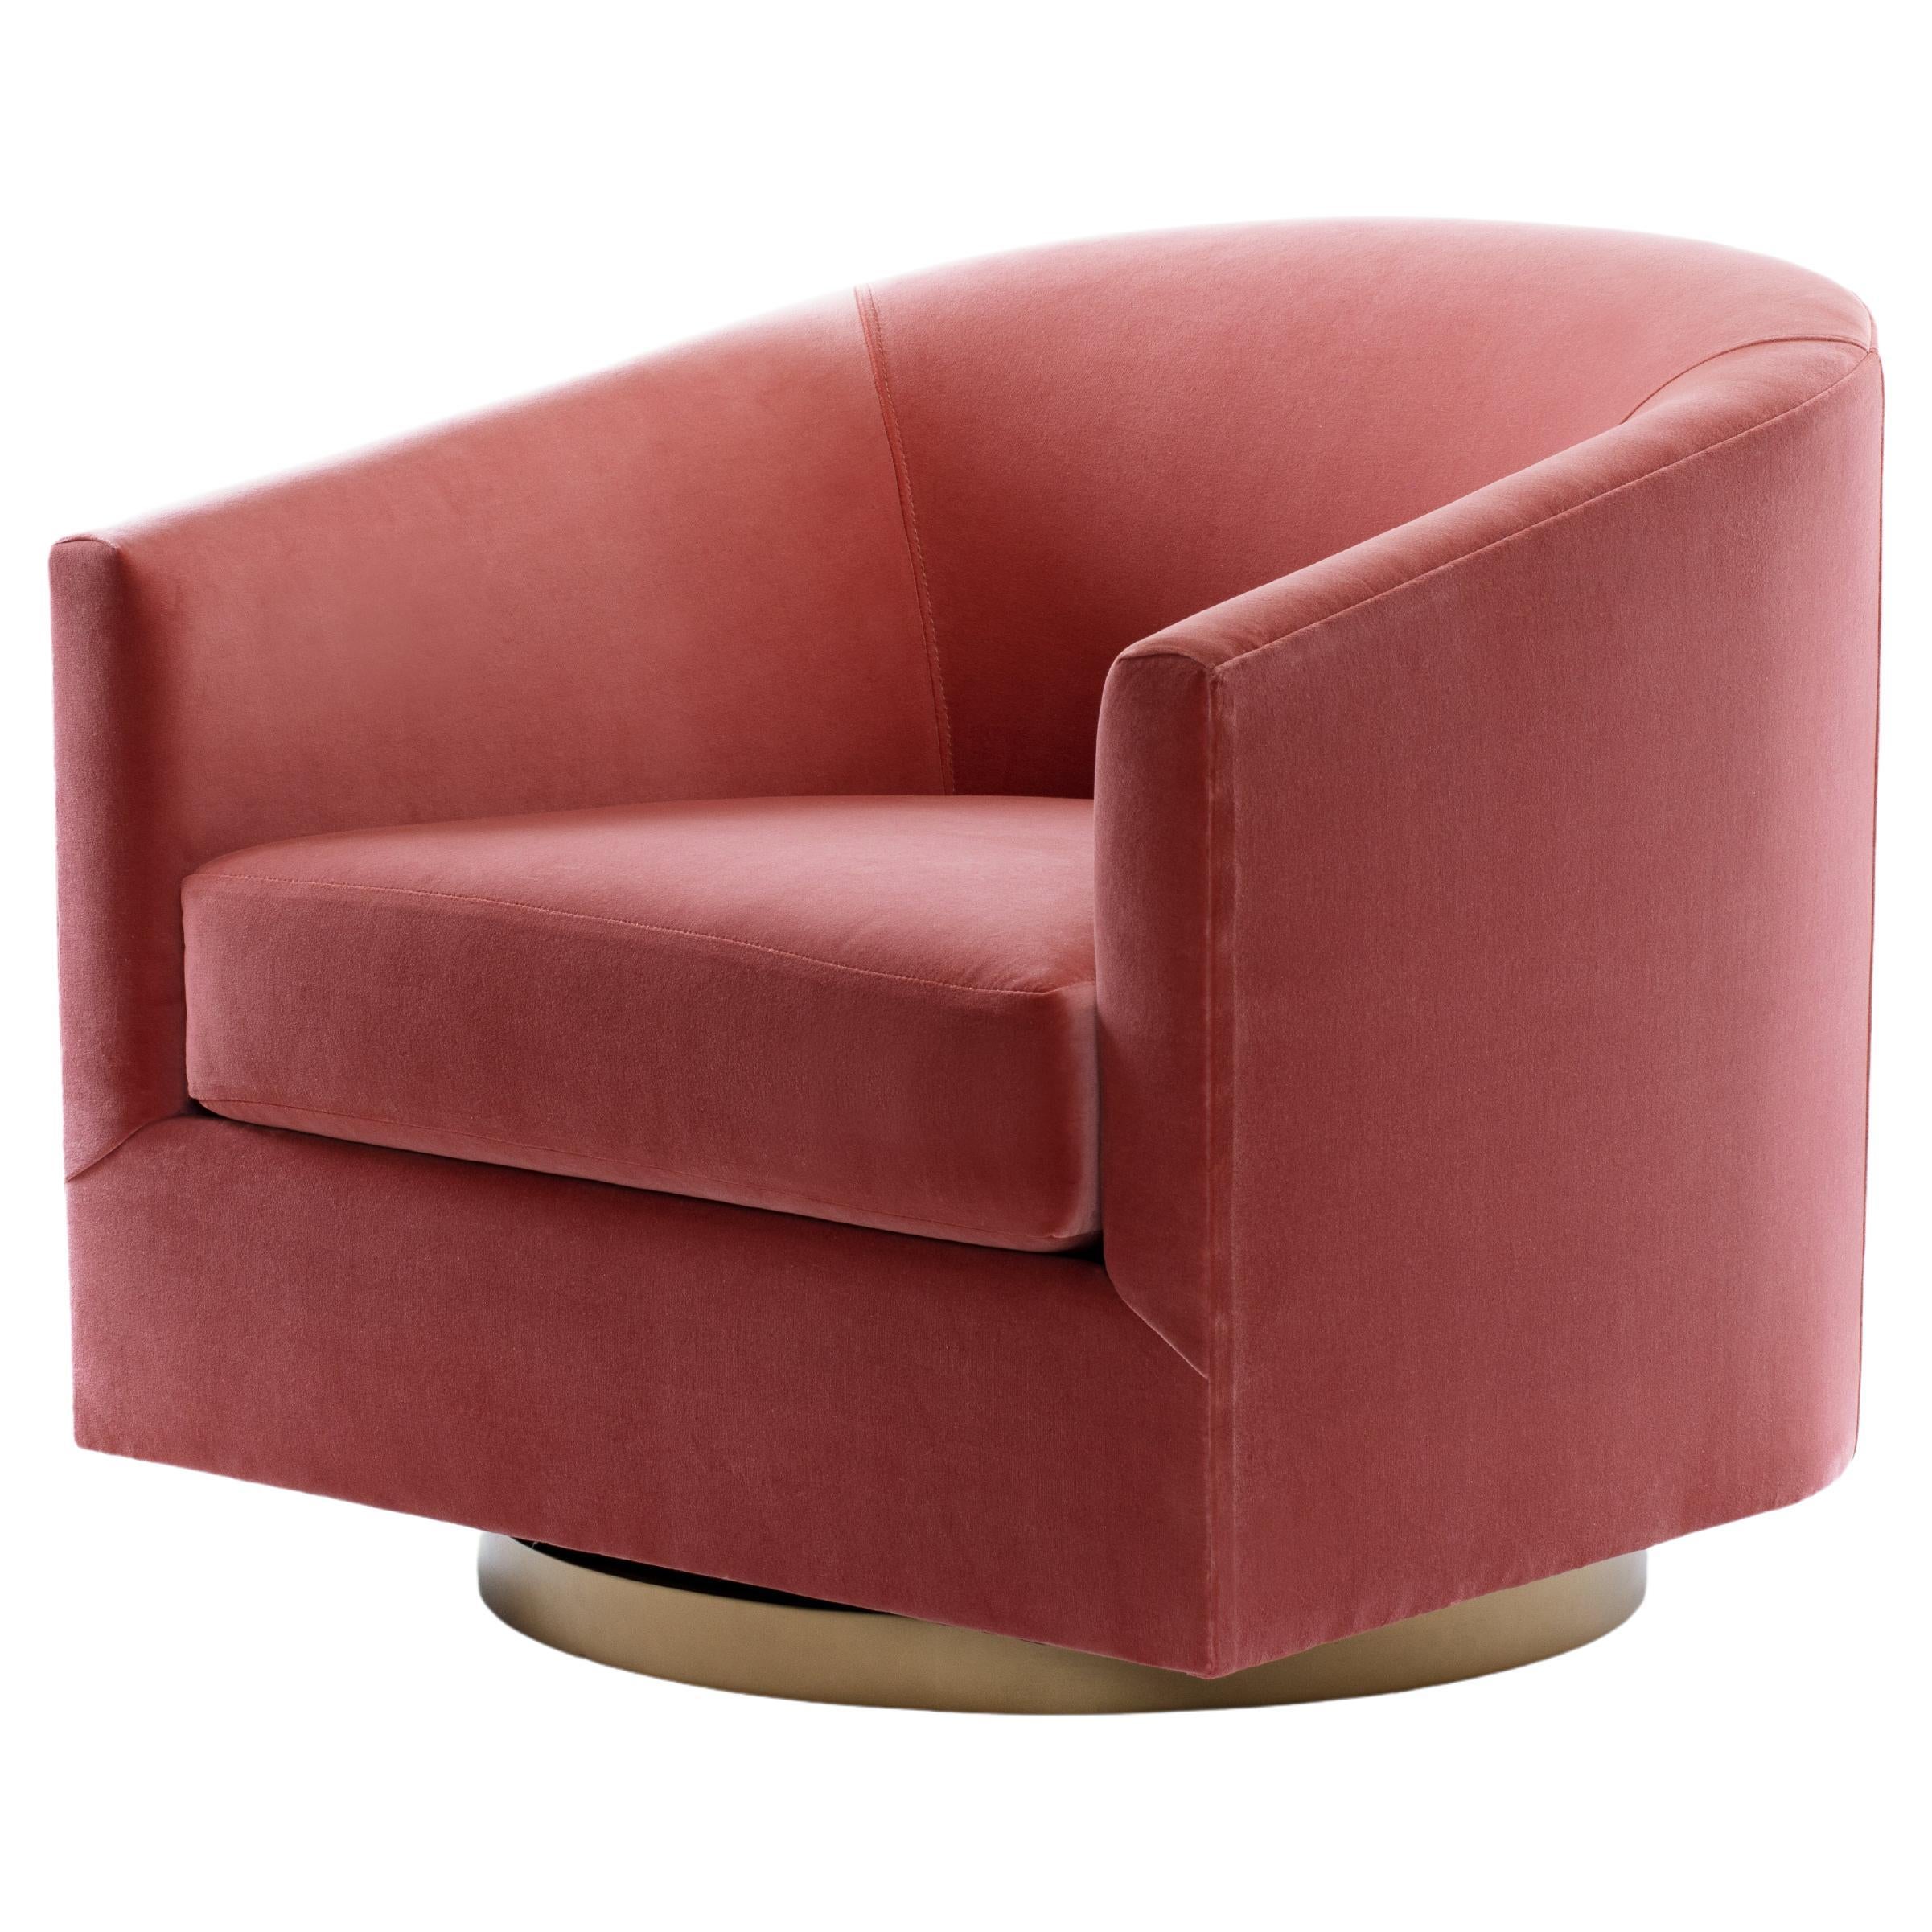 Contemporary Anna Swivel Chair Handcrafted by JAMES by Jimmy DeLaurentis For Sale